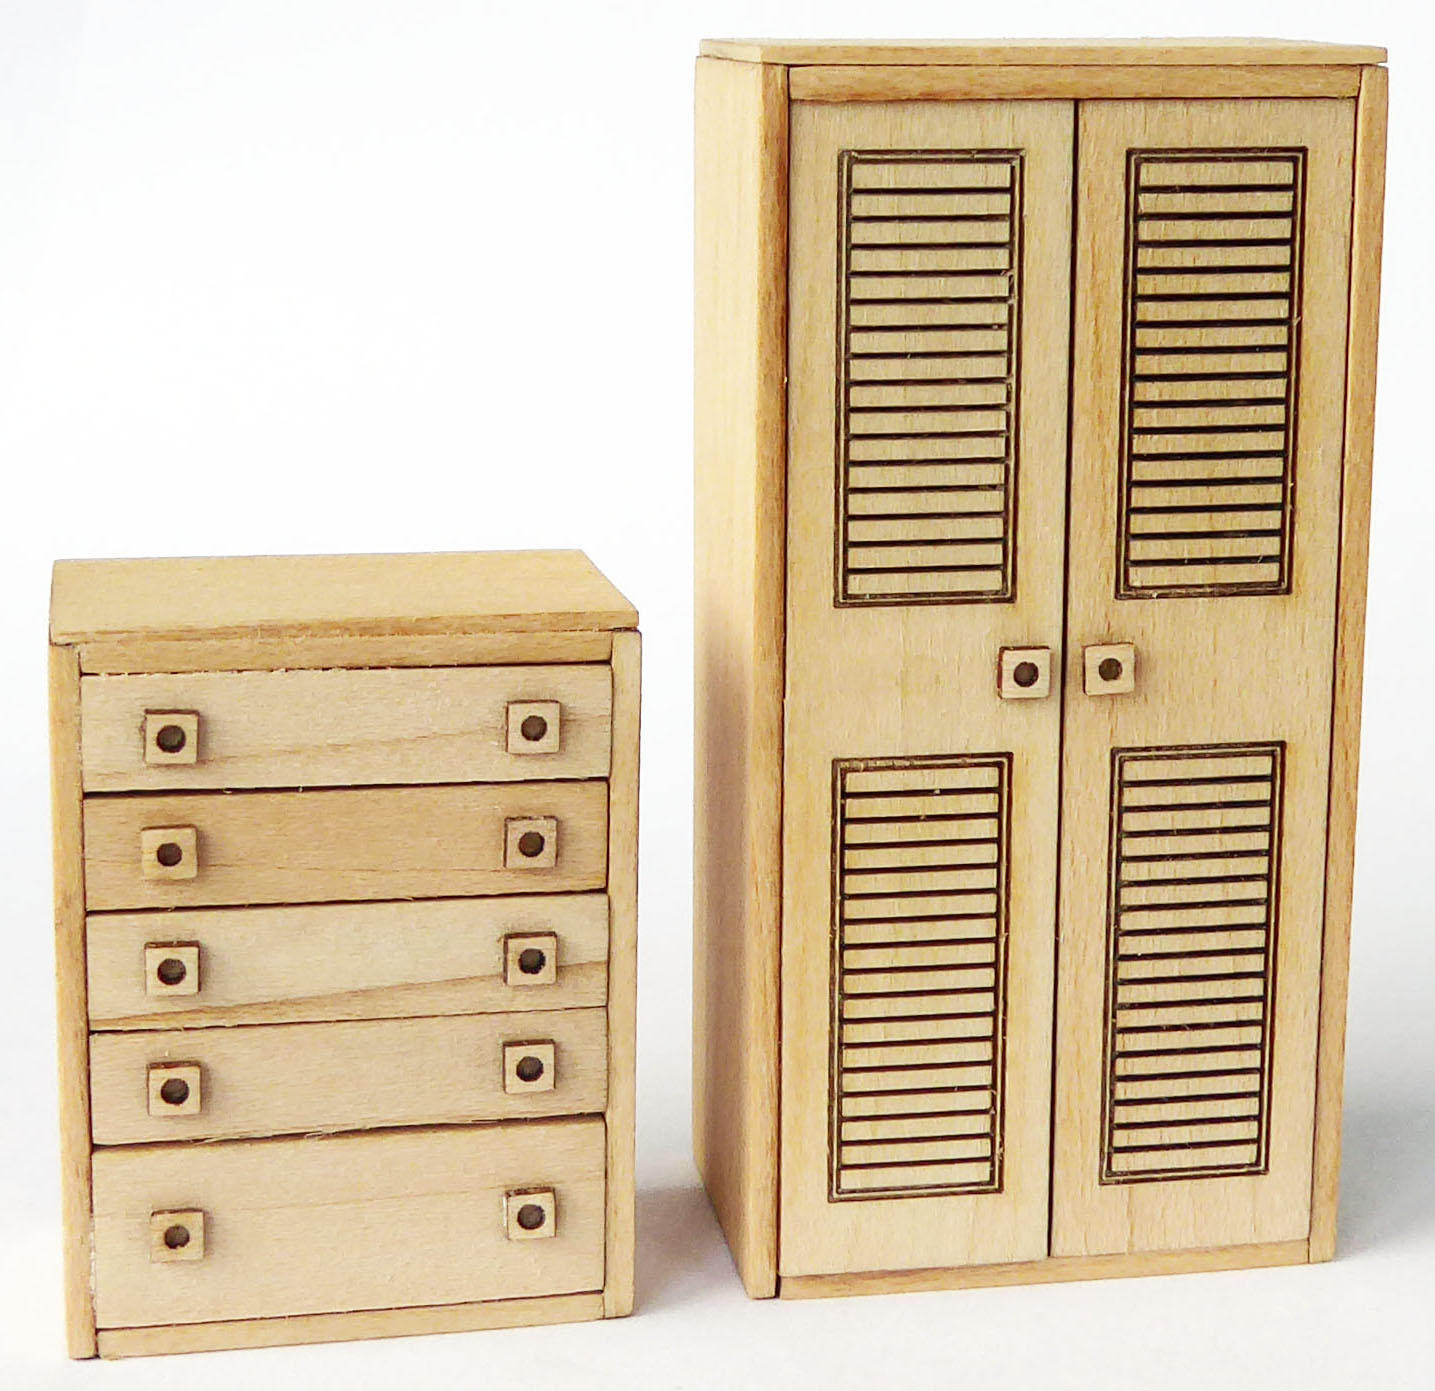 1/48th scale 70s Retro Wardrobe and Drawers Kit